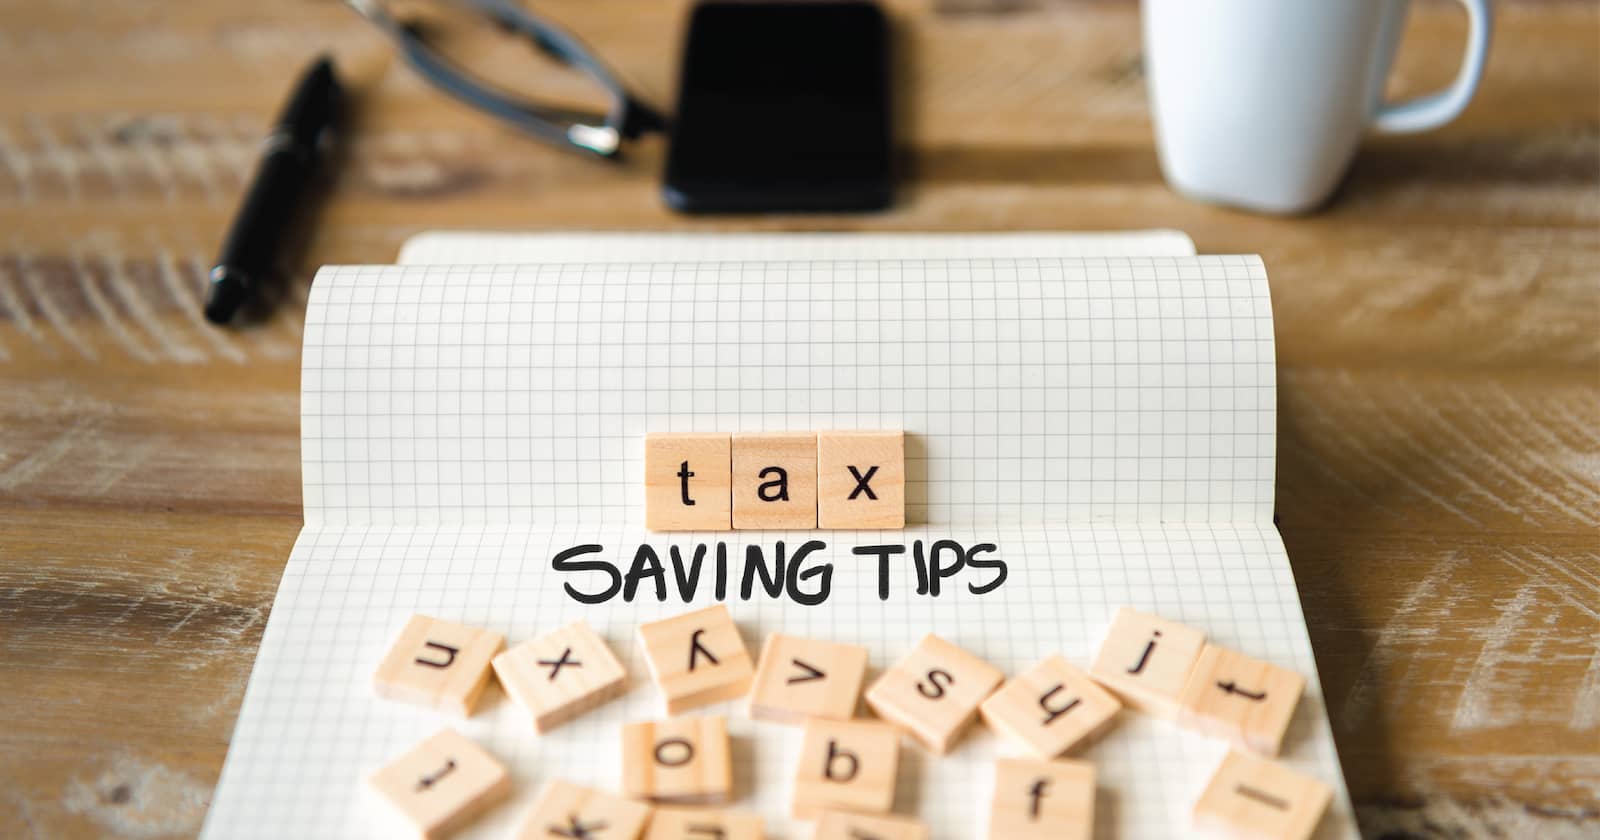 Tax Saving Tips for Families and Individuals